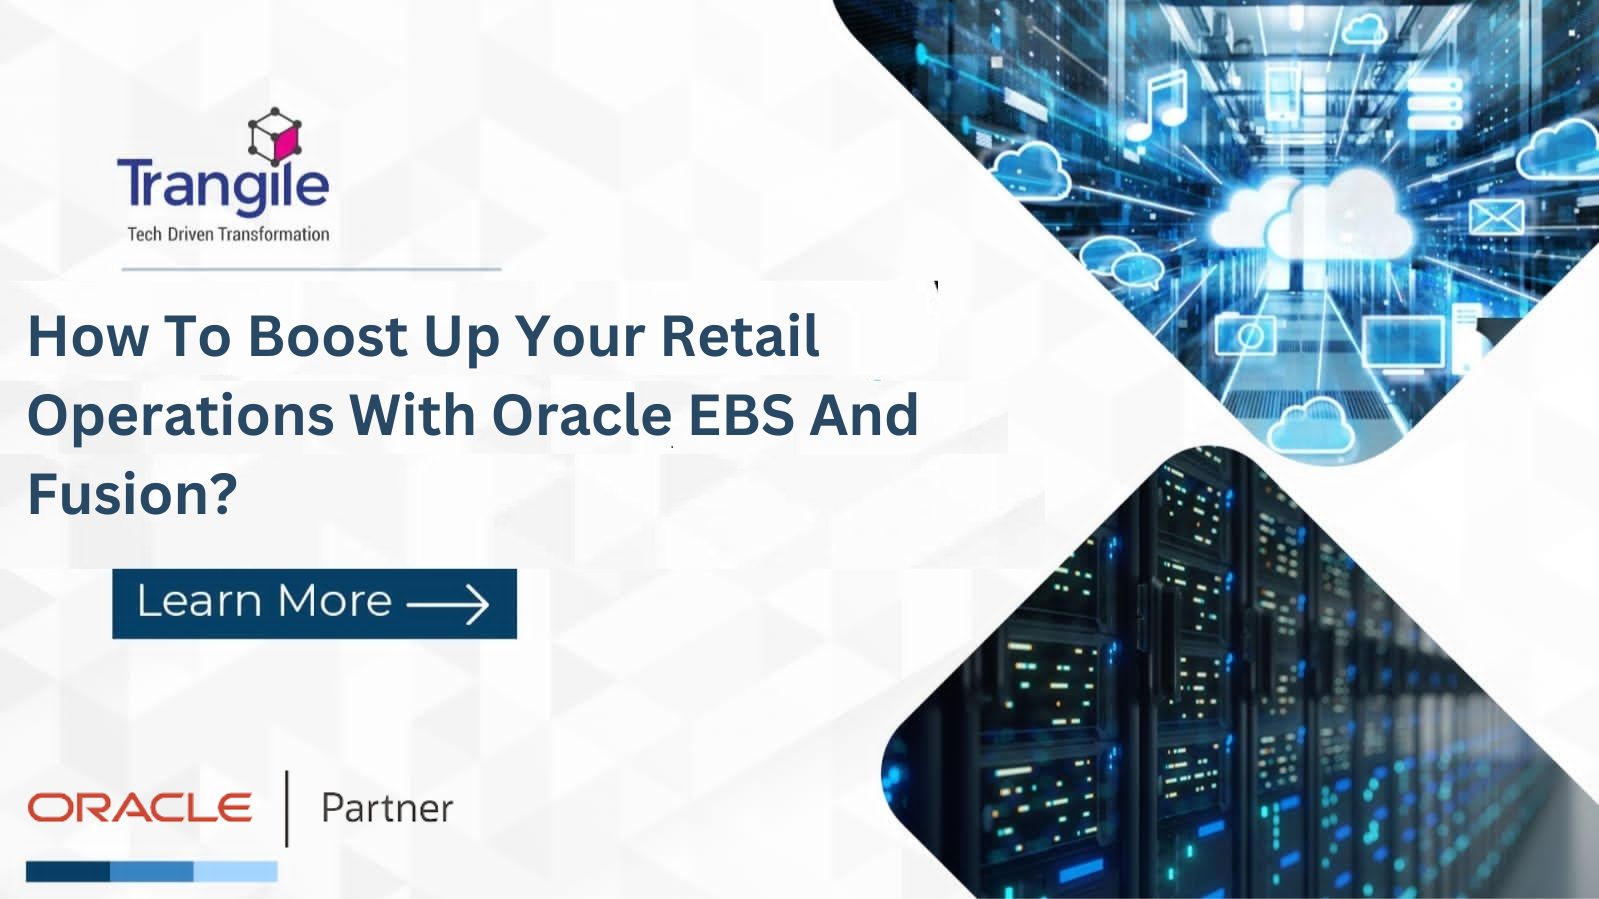 How To Boost Up Your Retail Operations With Oracle EBS And Fusion?